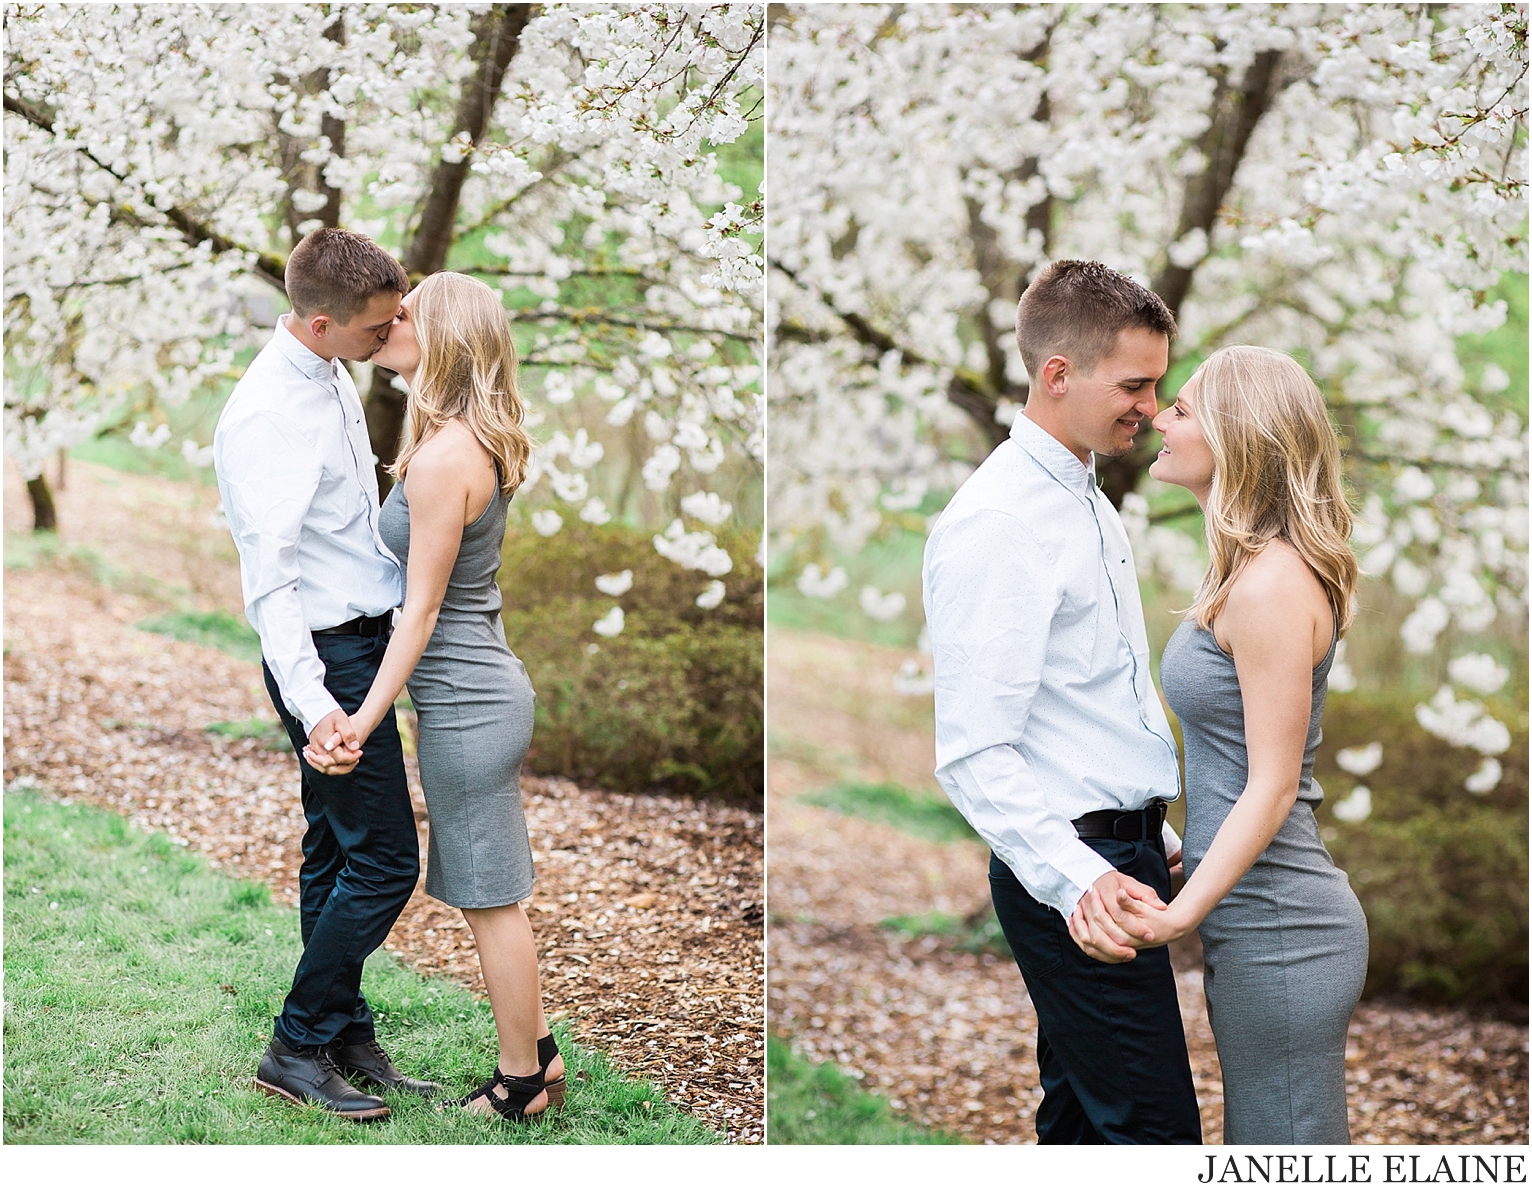 tricia and nate engagement photos-janelle elaine photography-105.jpg